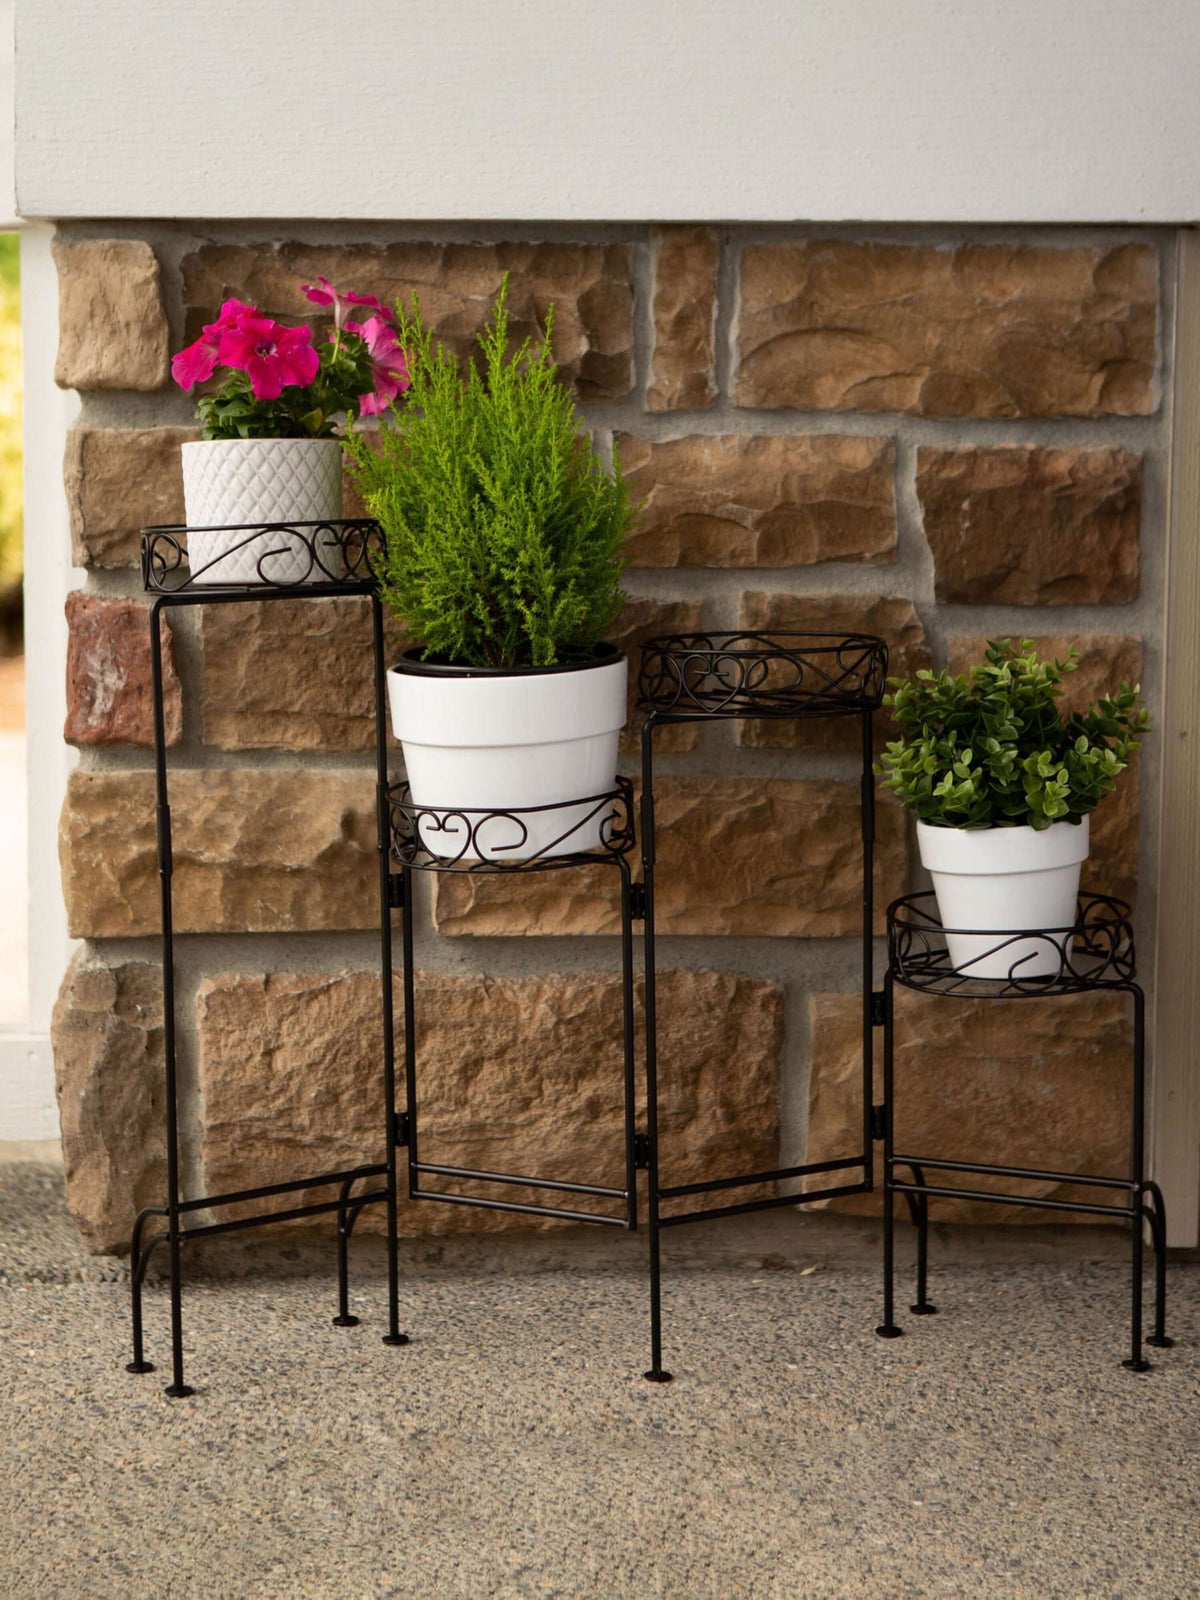 Set of 2 Four-Level Plant Stands For Inside